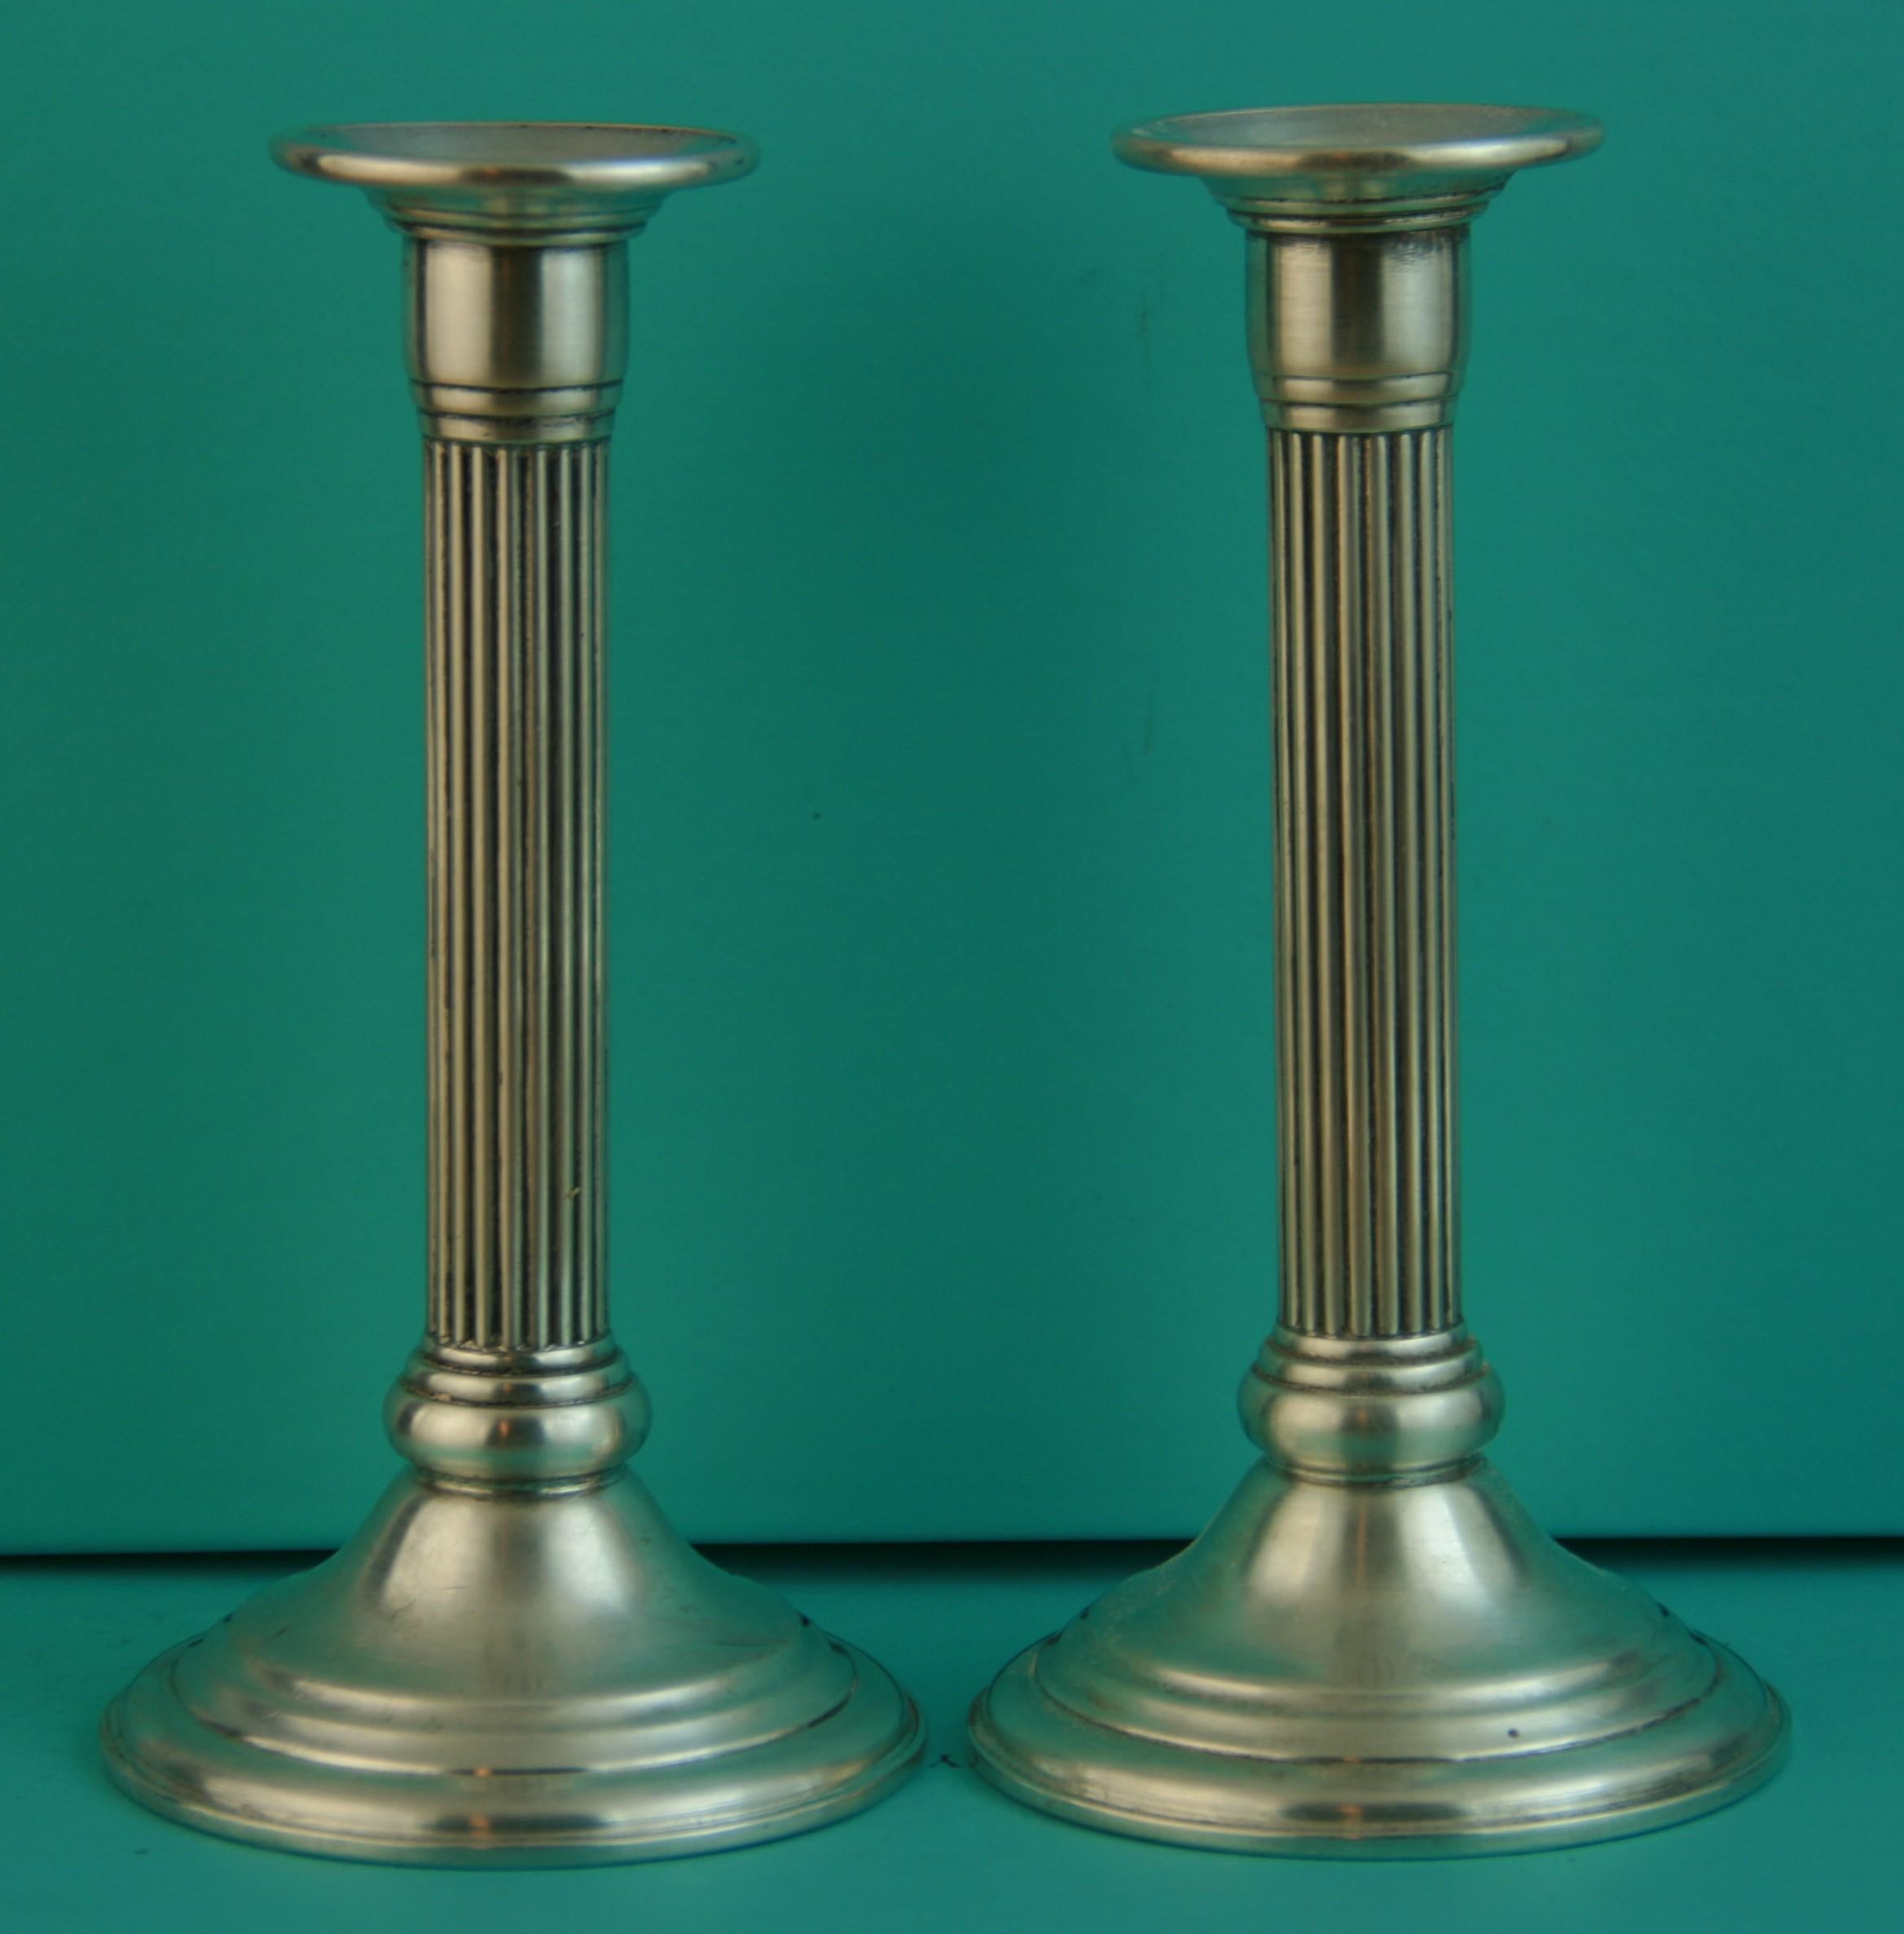 3-958 Pair fluted weighted sterling silver candle sticks
Marked sterling on bottom with makers name.